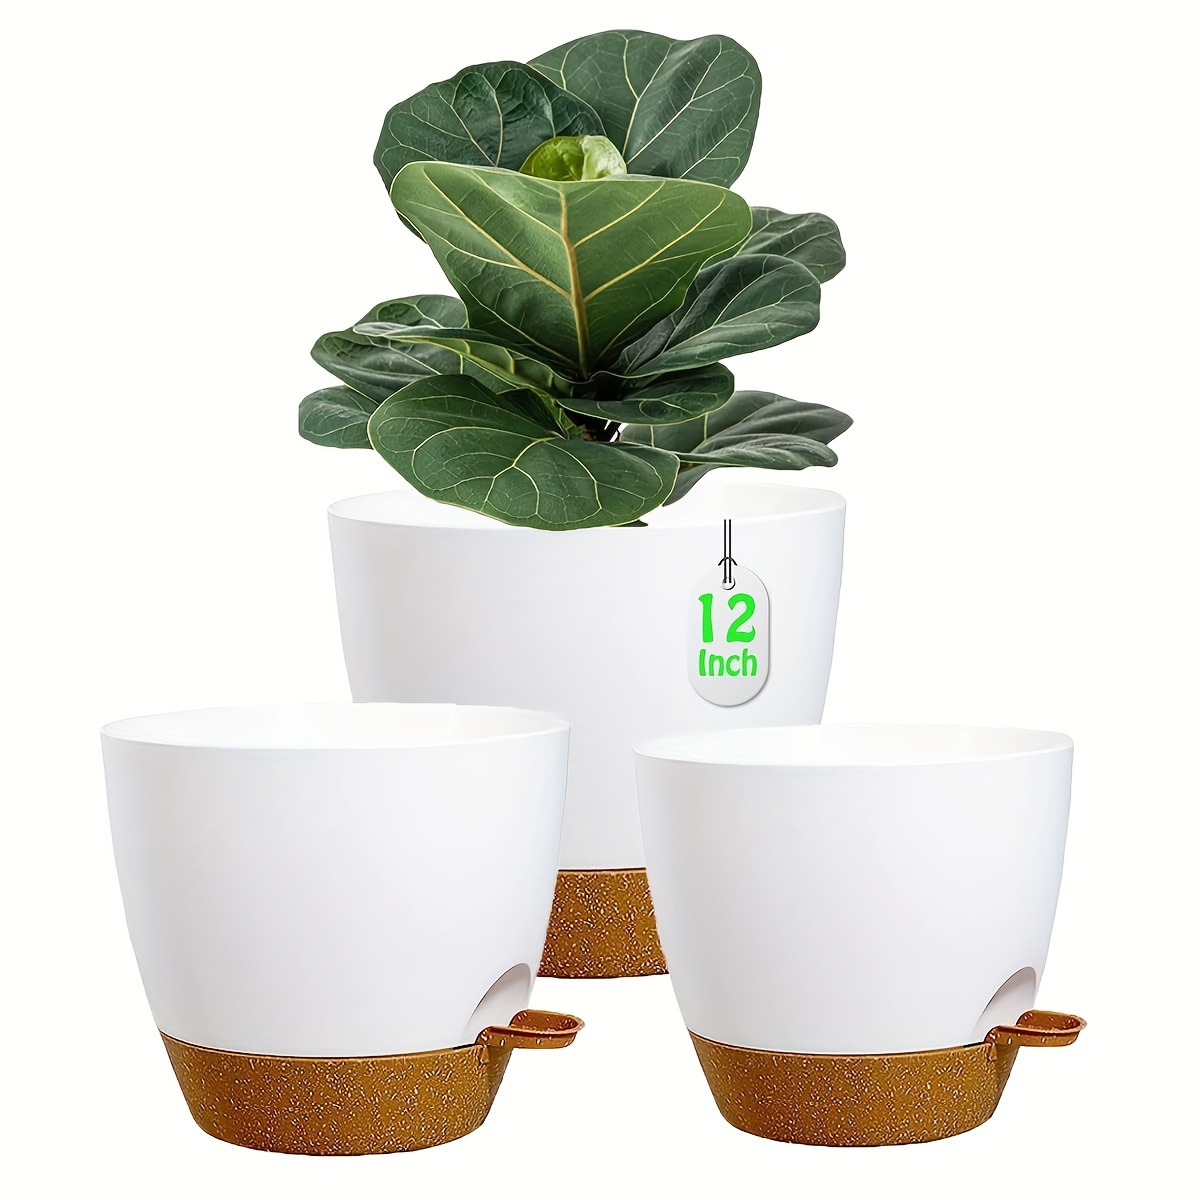 

3pcs, Promotion Pack,curve Model,plant Pots 12/10/9 Inch Self Watering Planters With Drainage Hole, Plastic Flower Pots, Planters For Indoor Plants, Succulents,snake Plant, African Violet, Flowers